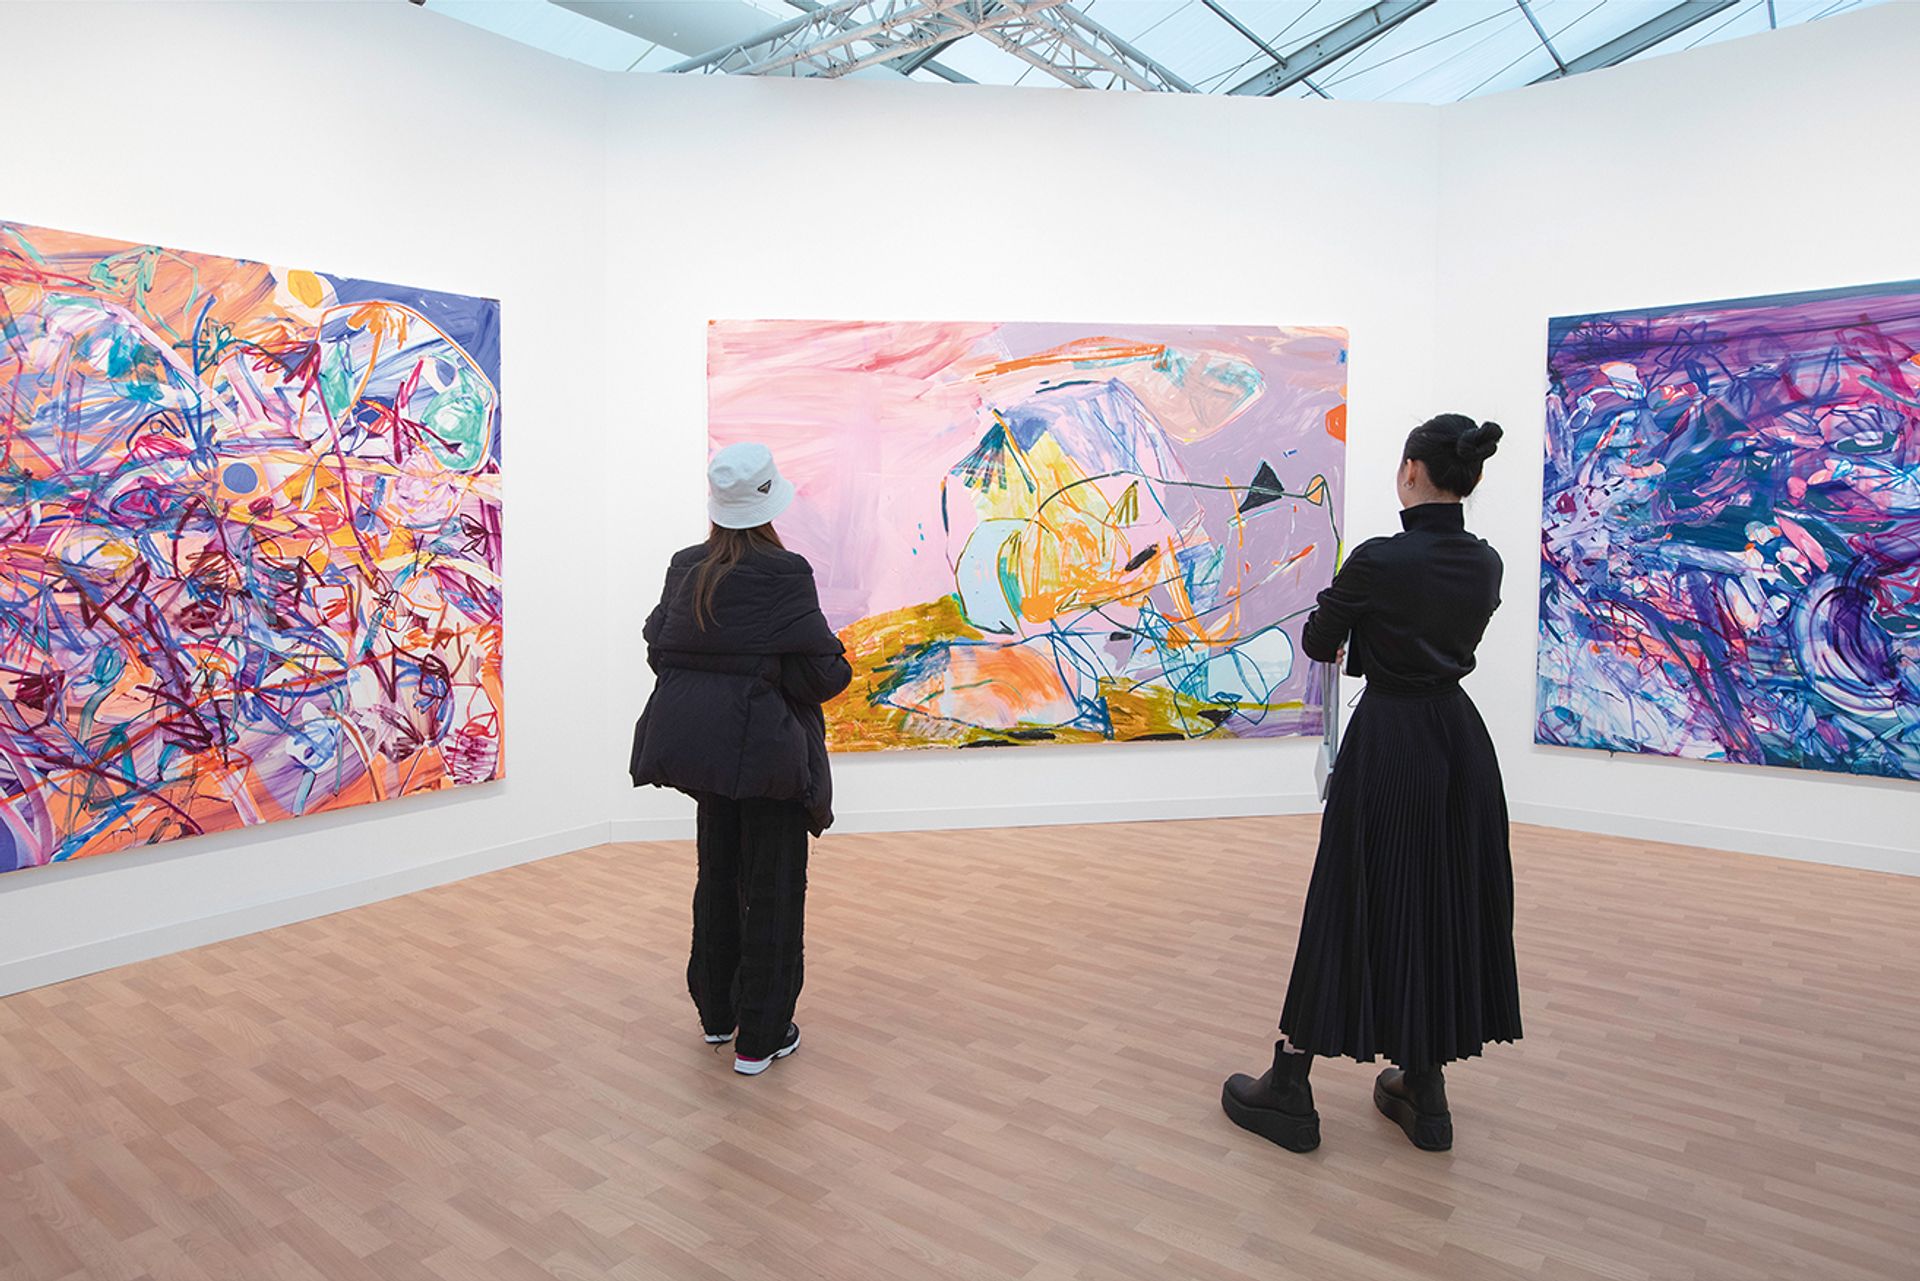 Jadé Fadojutimi’s work at Gagosian’s Frieze London stand had already sold out before the fair had even opened yesterday David Owens